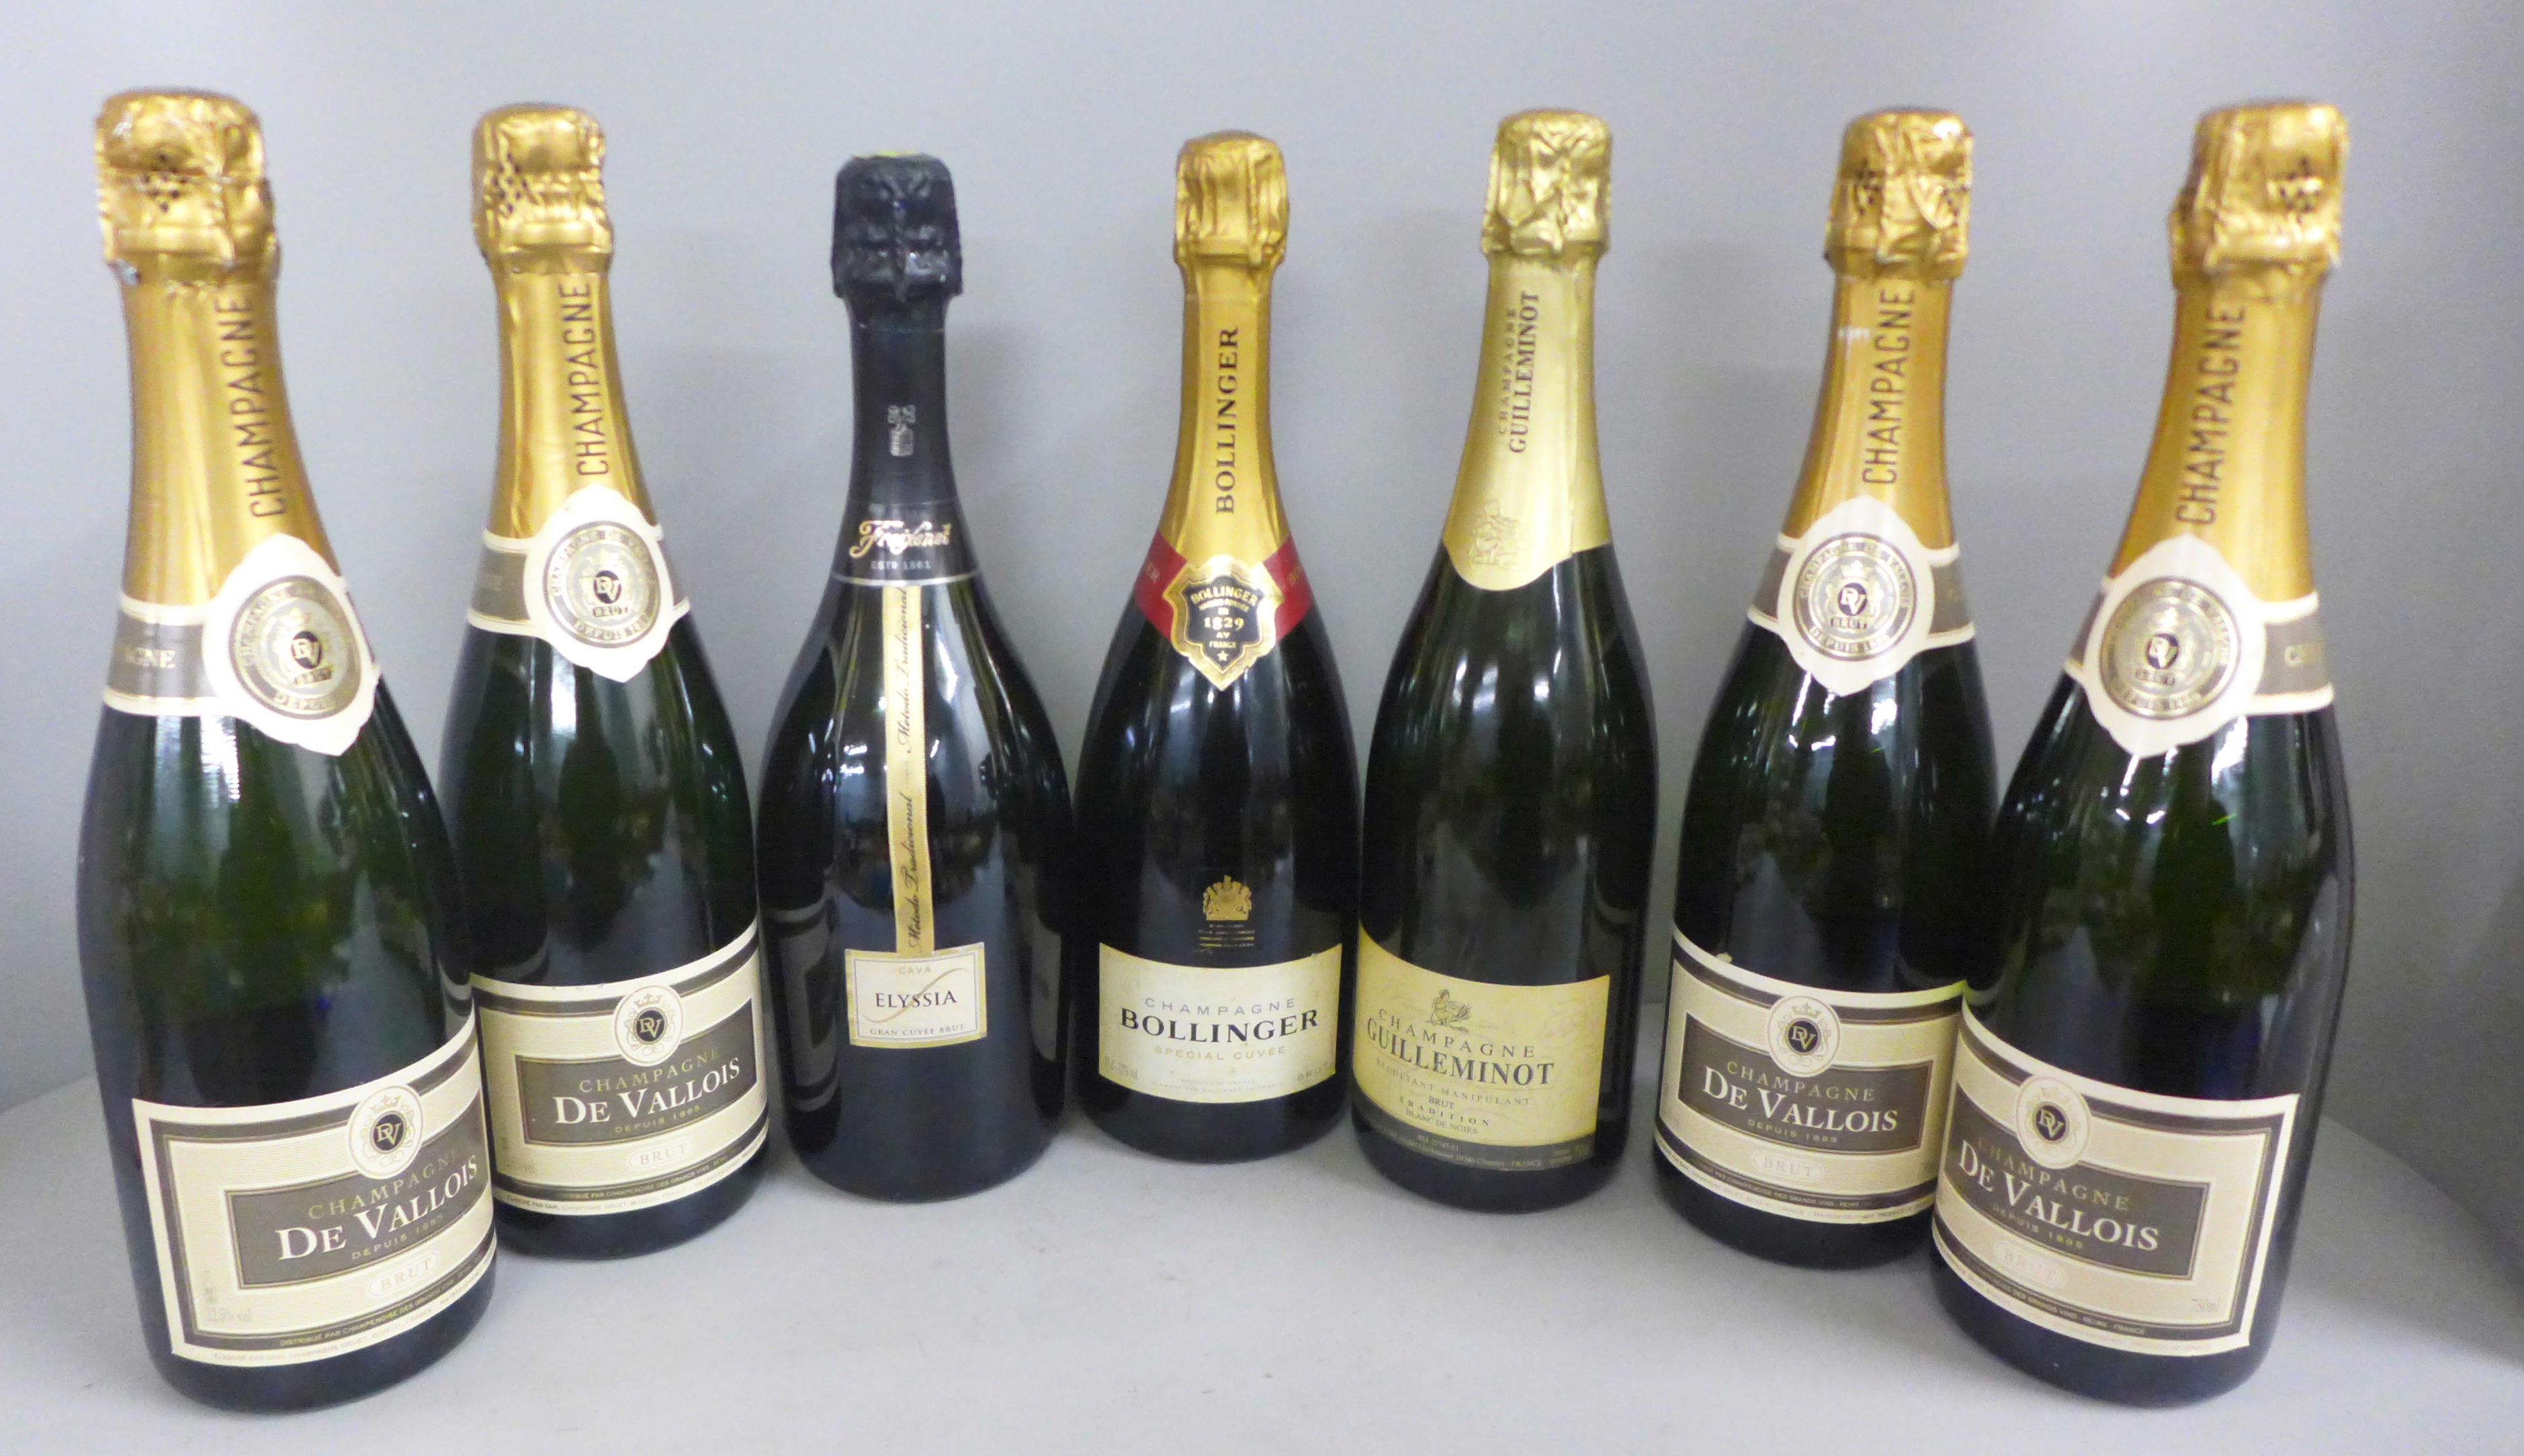 Seven bottles: four De Vallois Champagne, one Bollinger Champagne Special Cuvee and two others